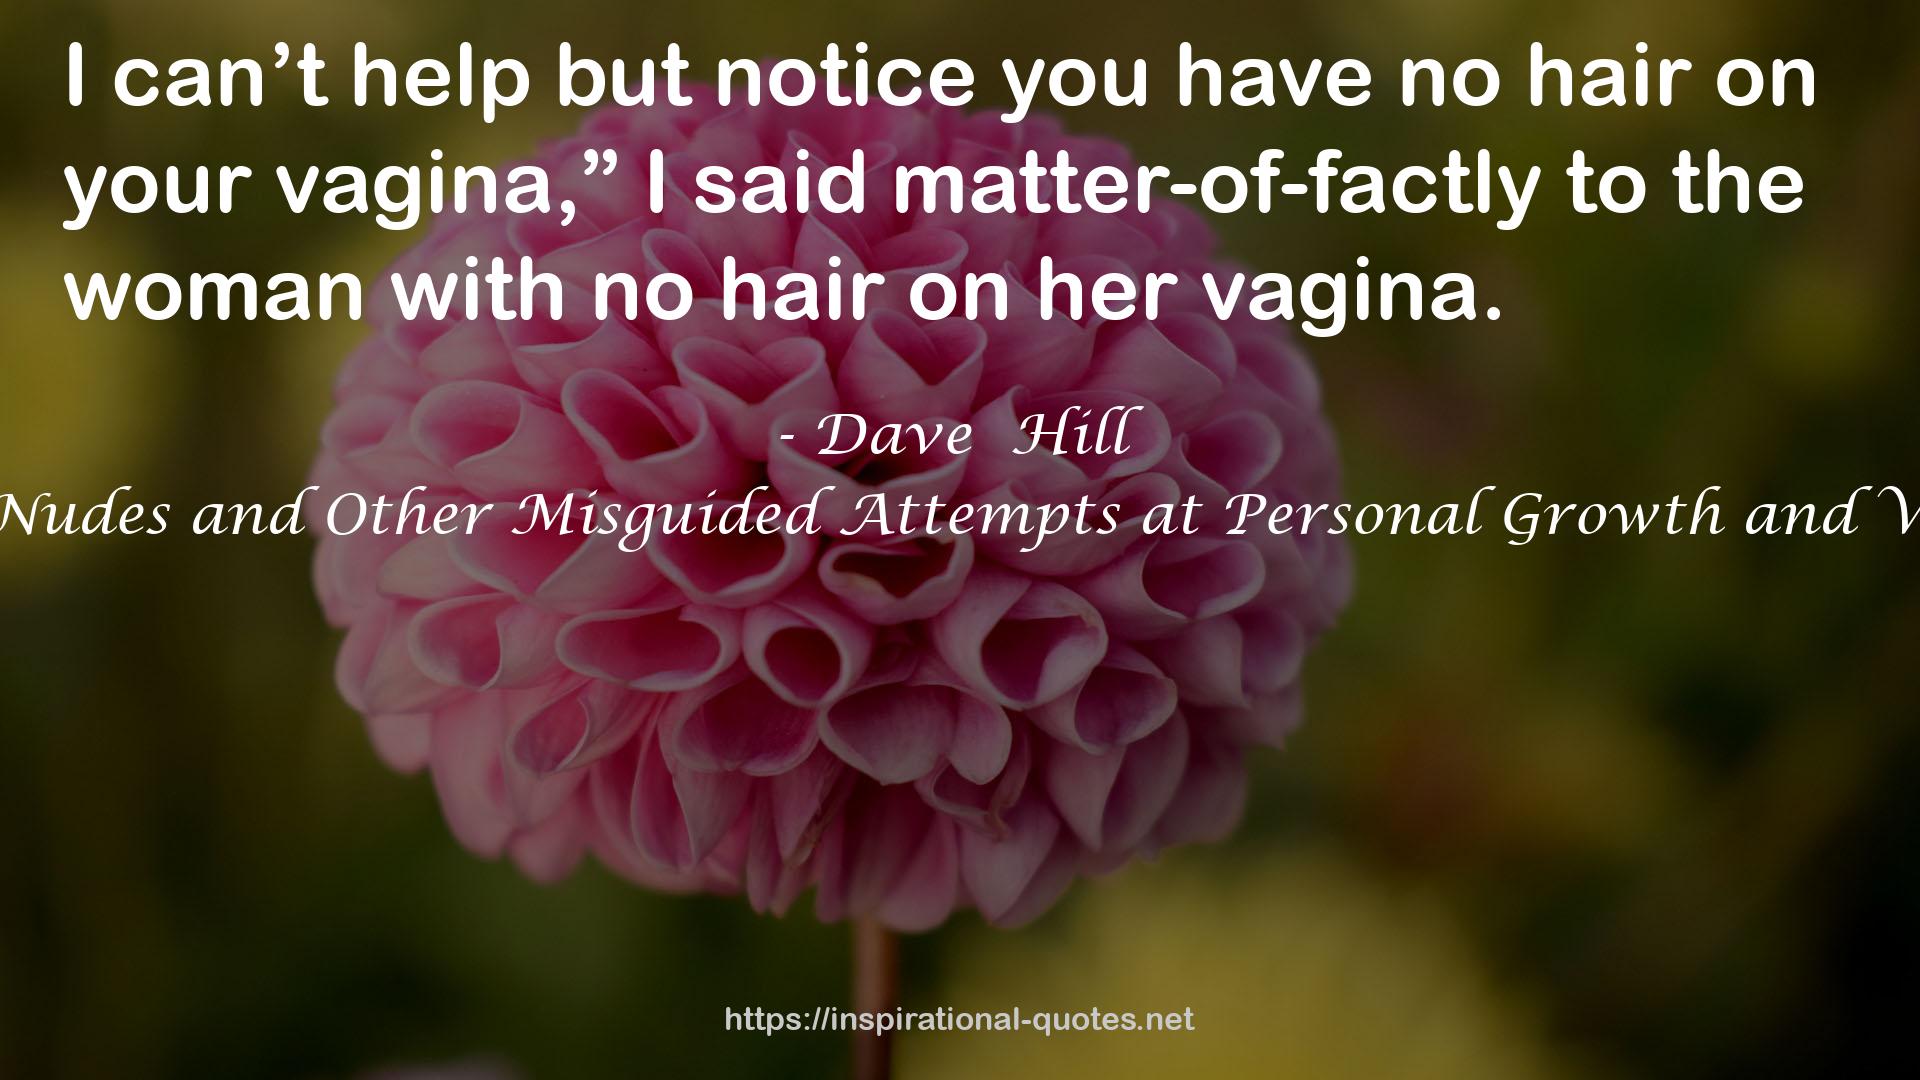 Tasteful Nudes and Other Misguided Attempts at Personal Growth and Validation QUOTES